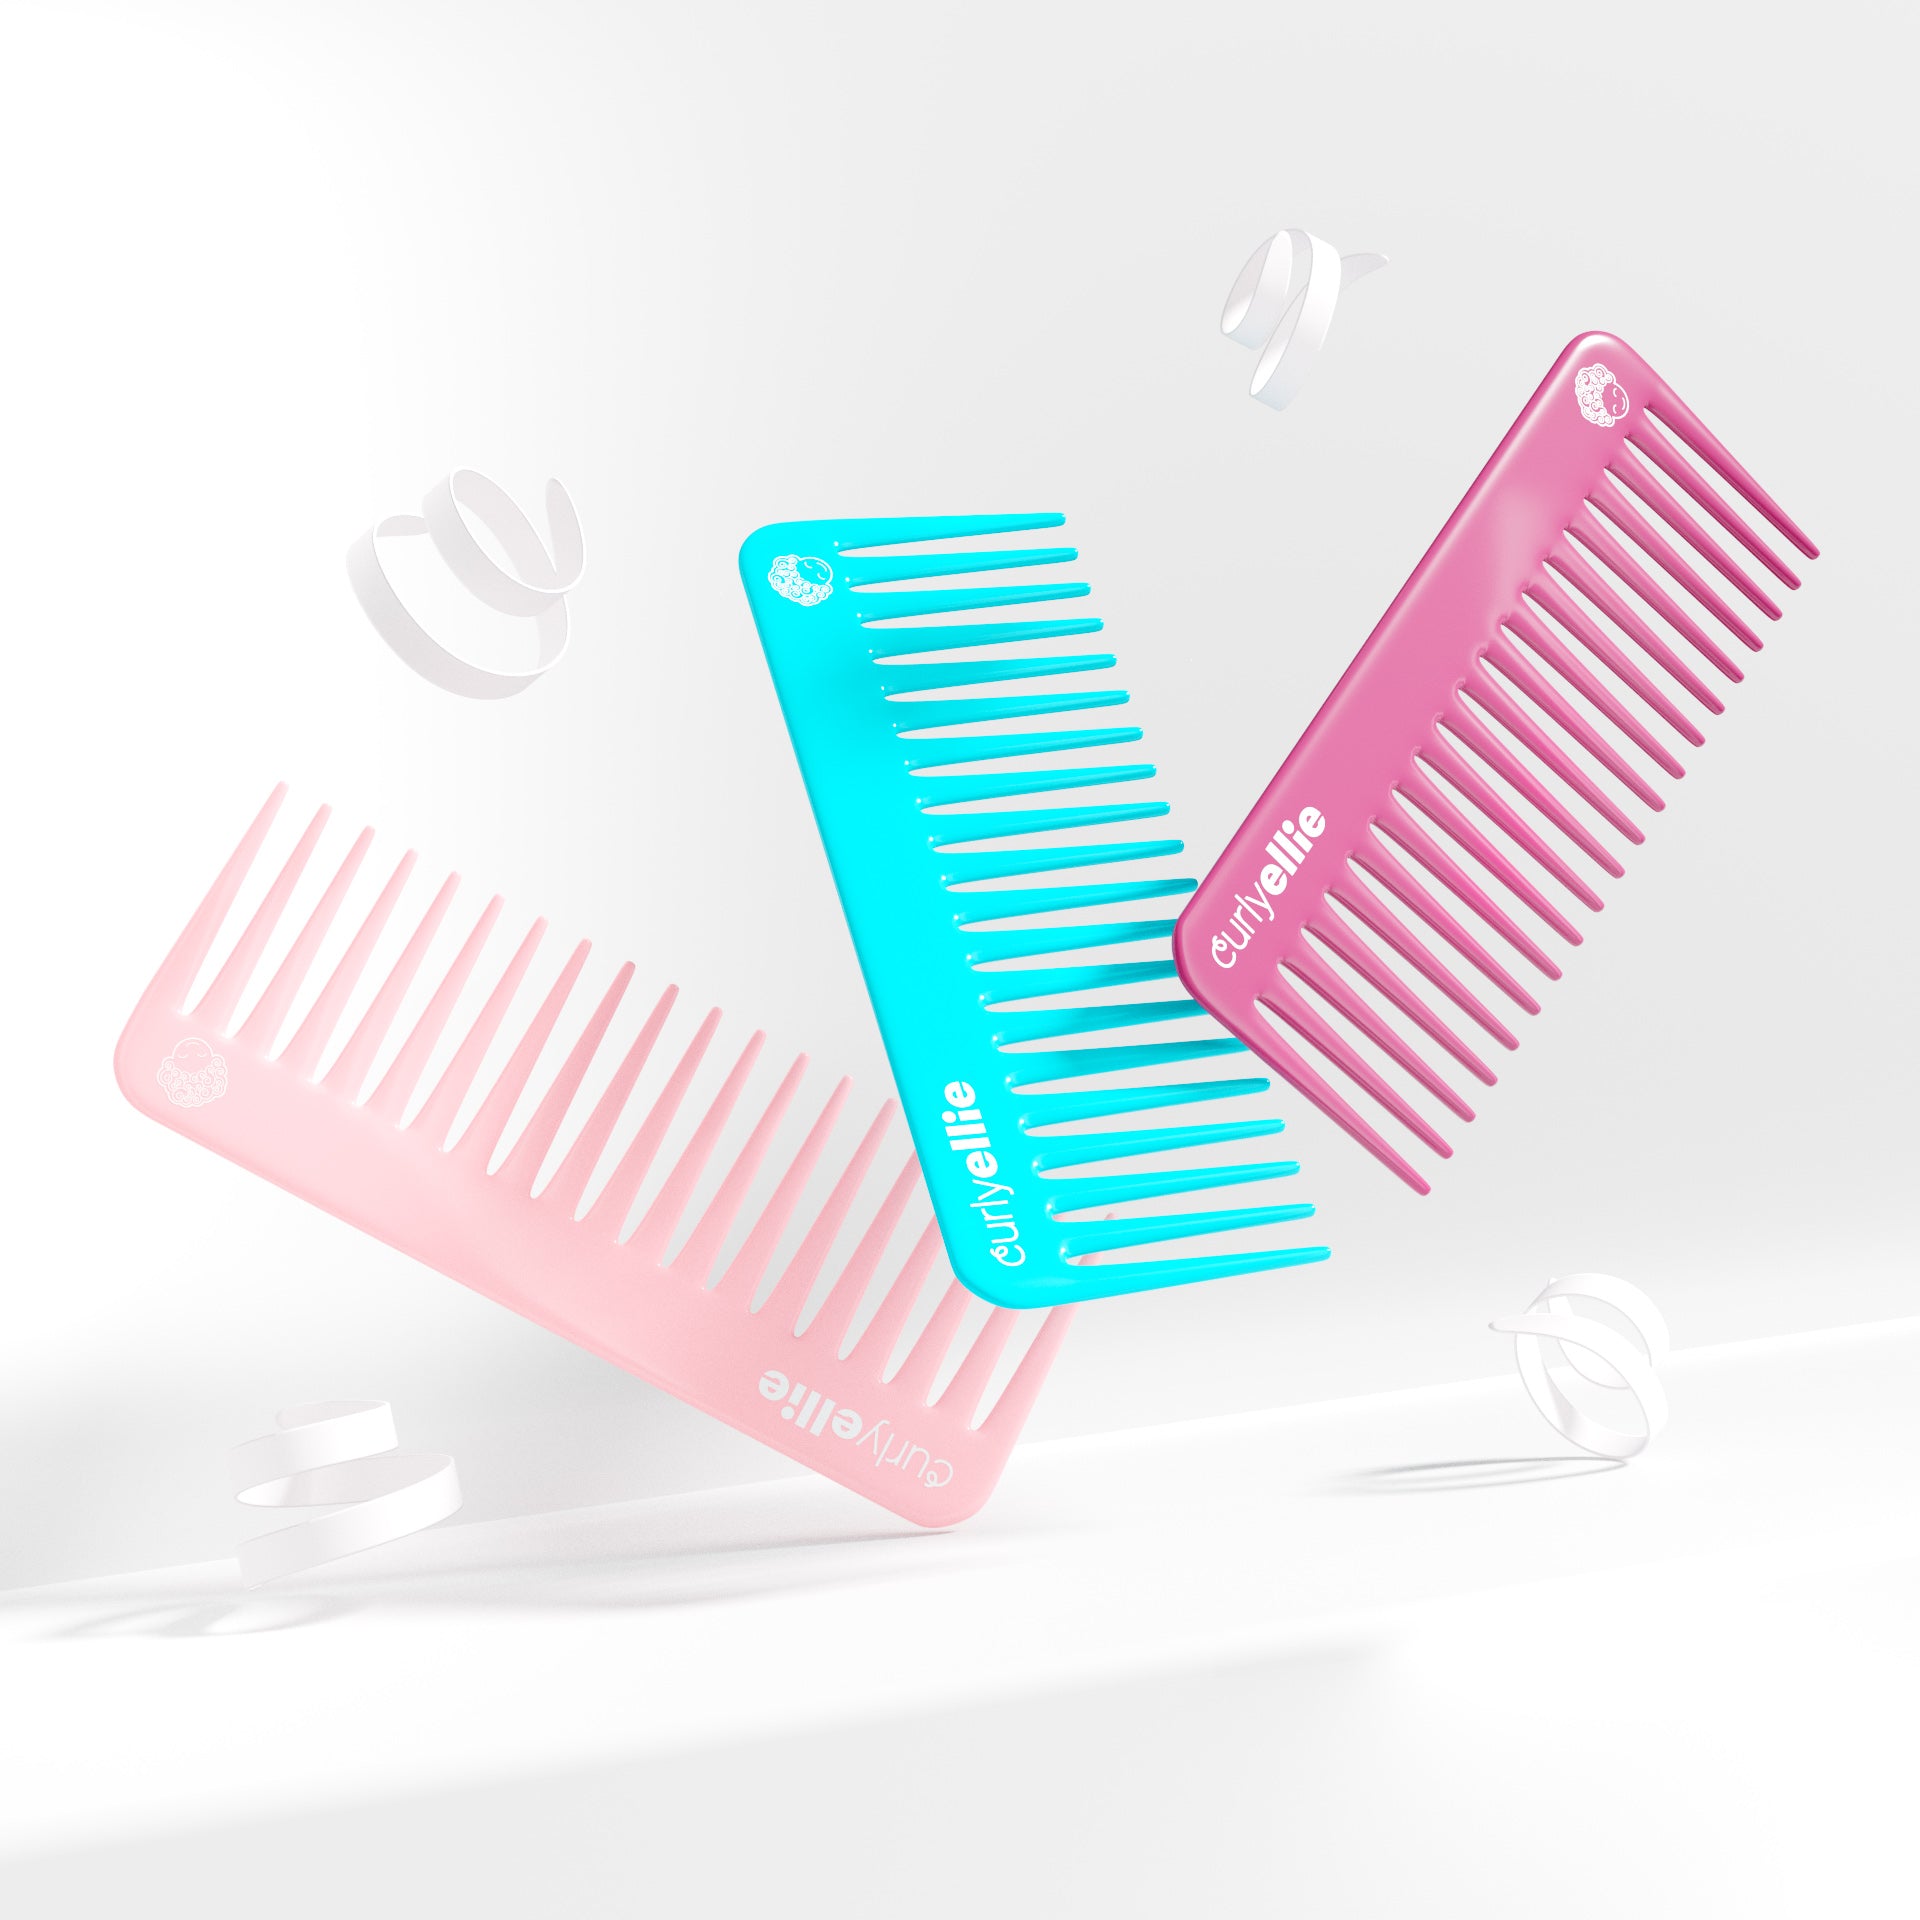 INTRODUCING: The Curly Comb!